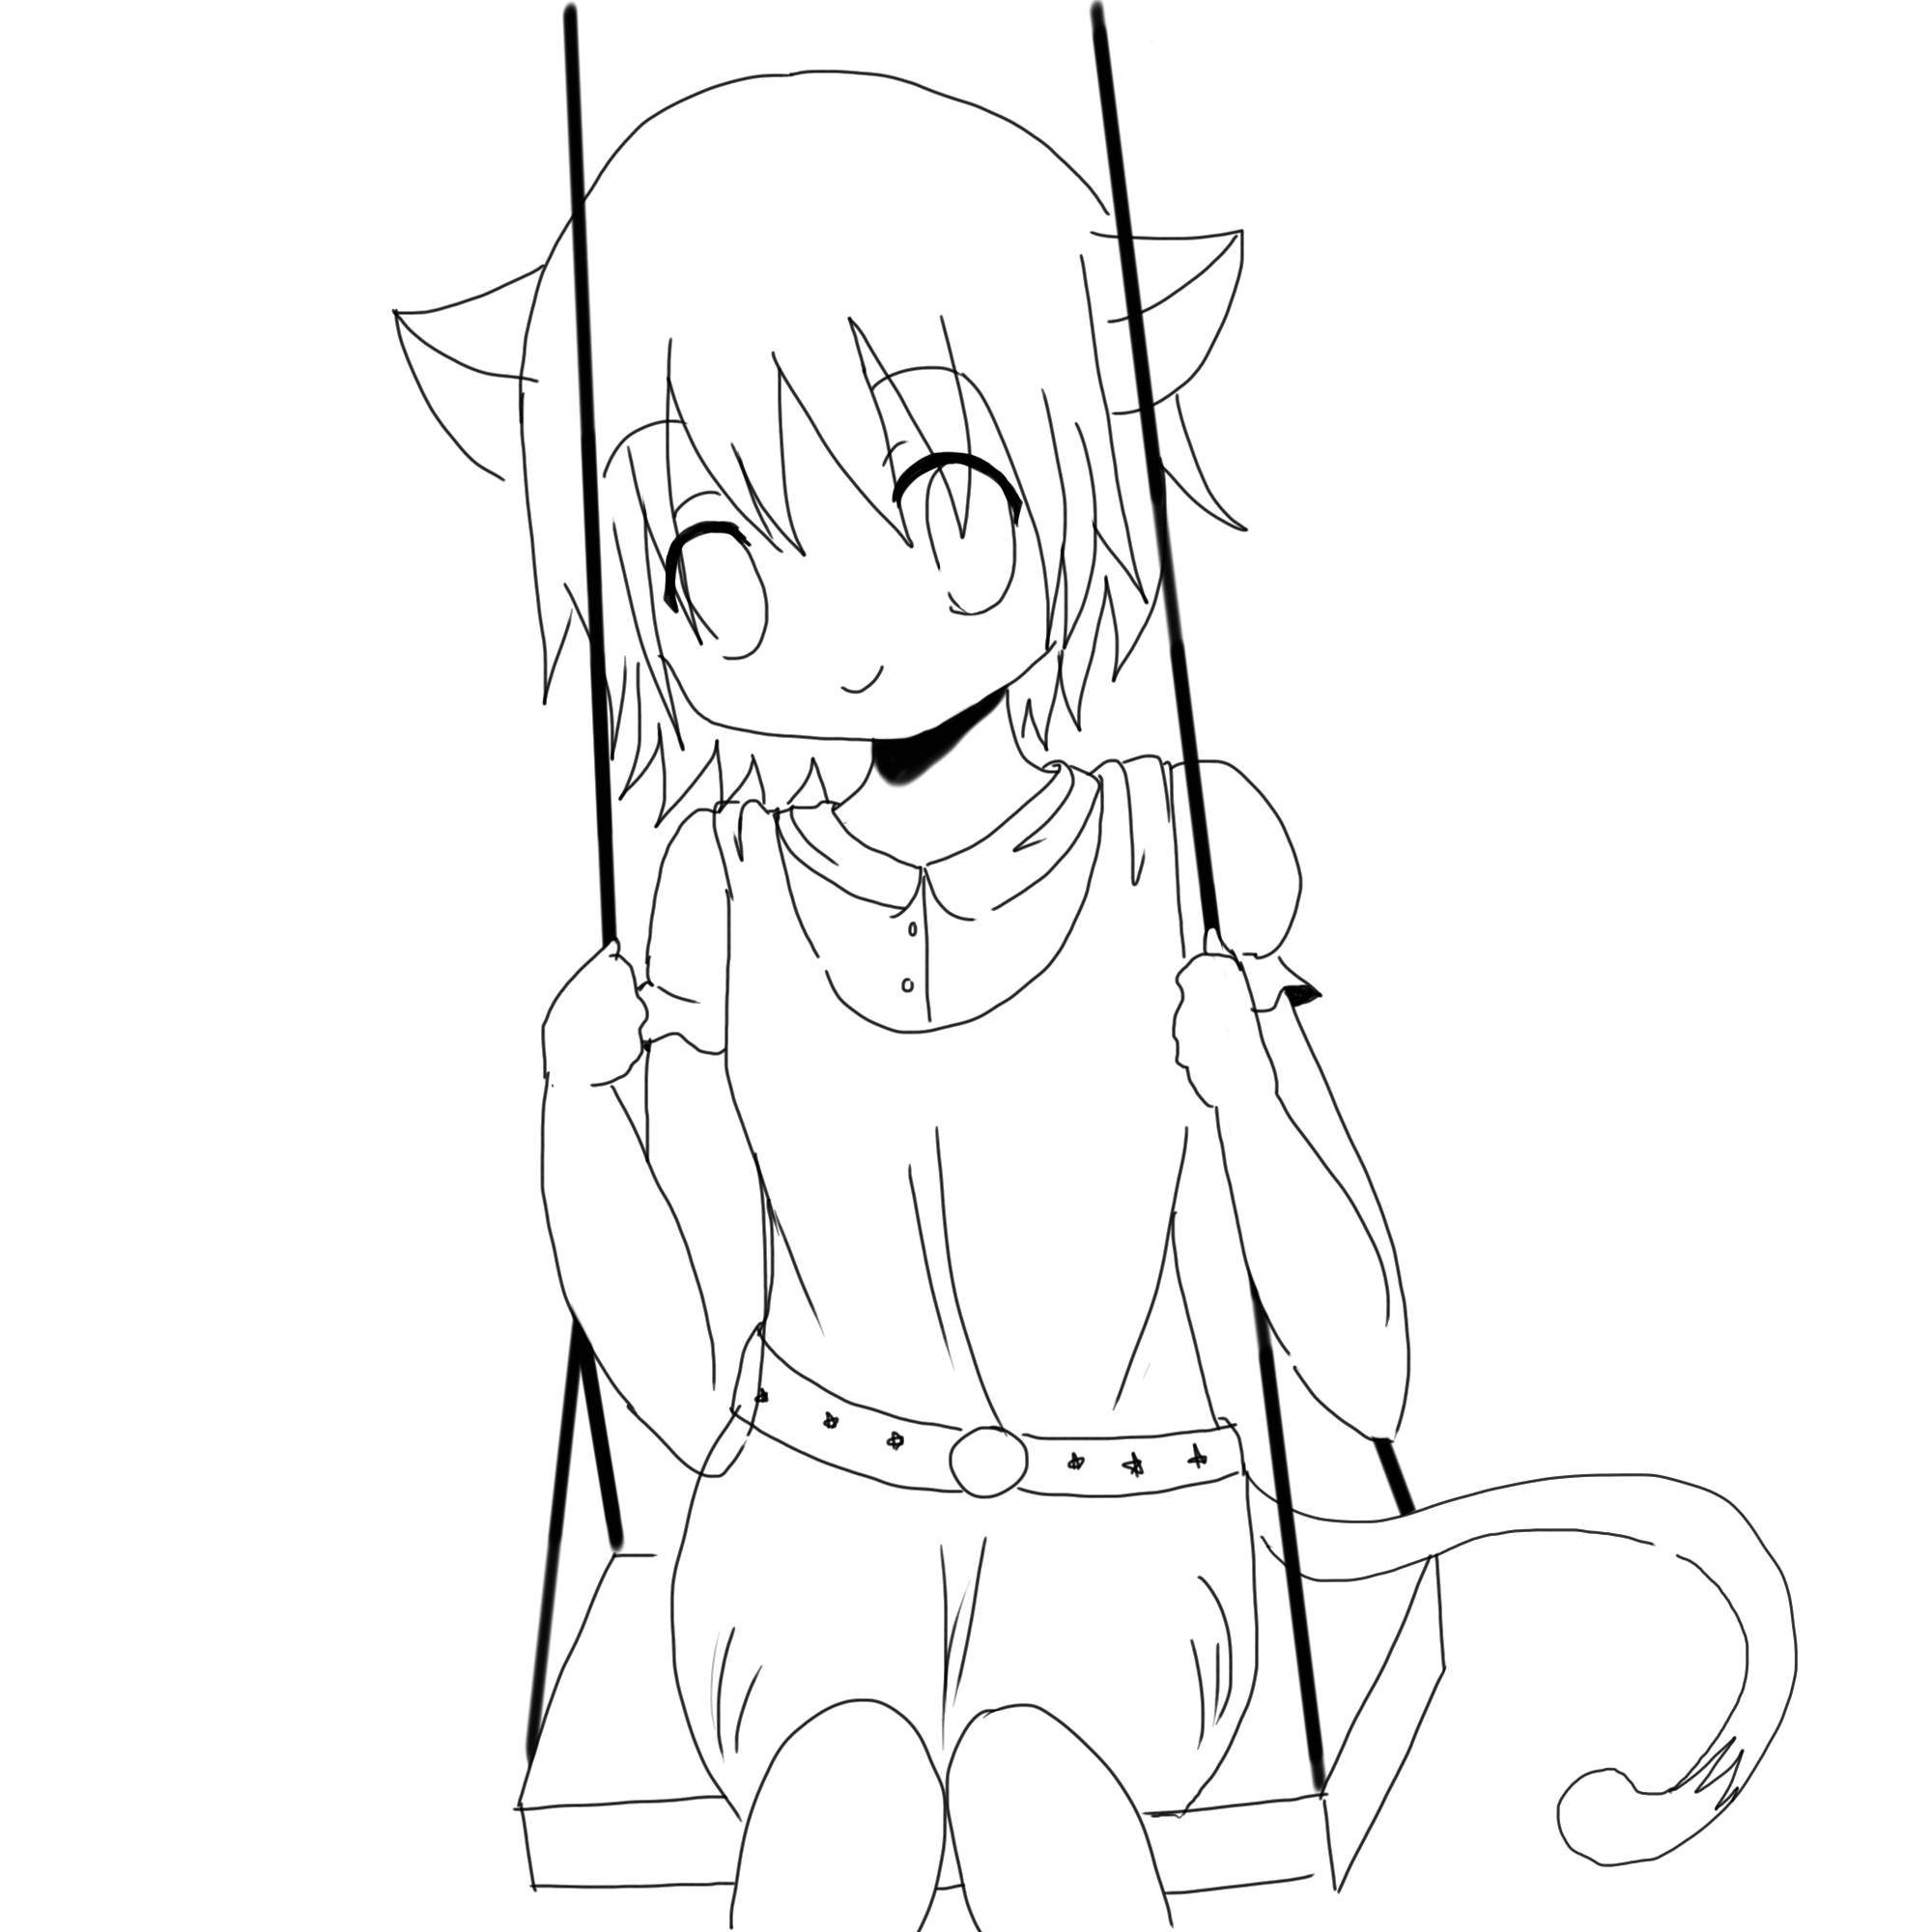 Anime Cats Coloring Pages - Free Anime Cats Coloring Pages